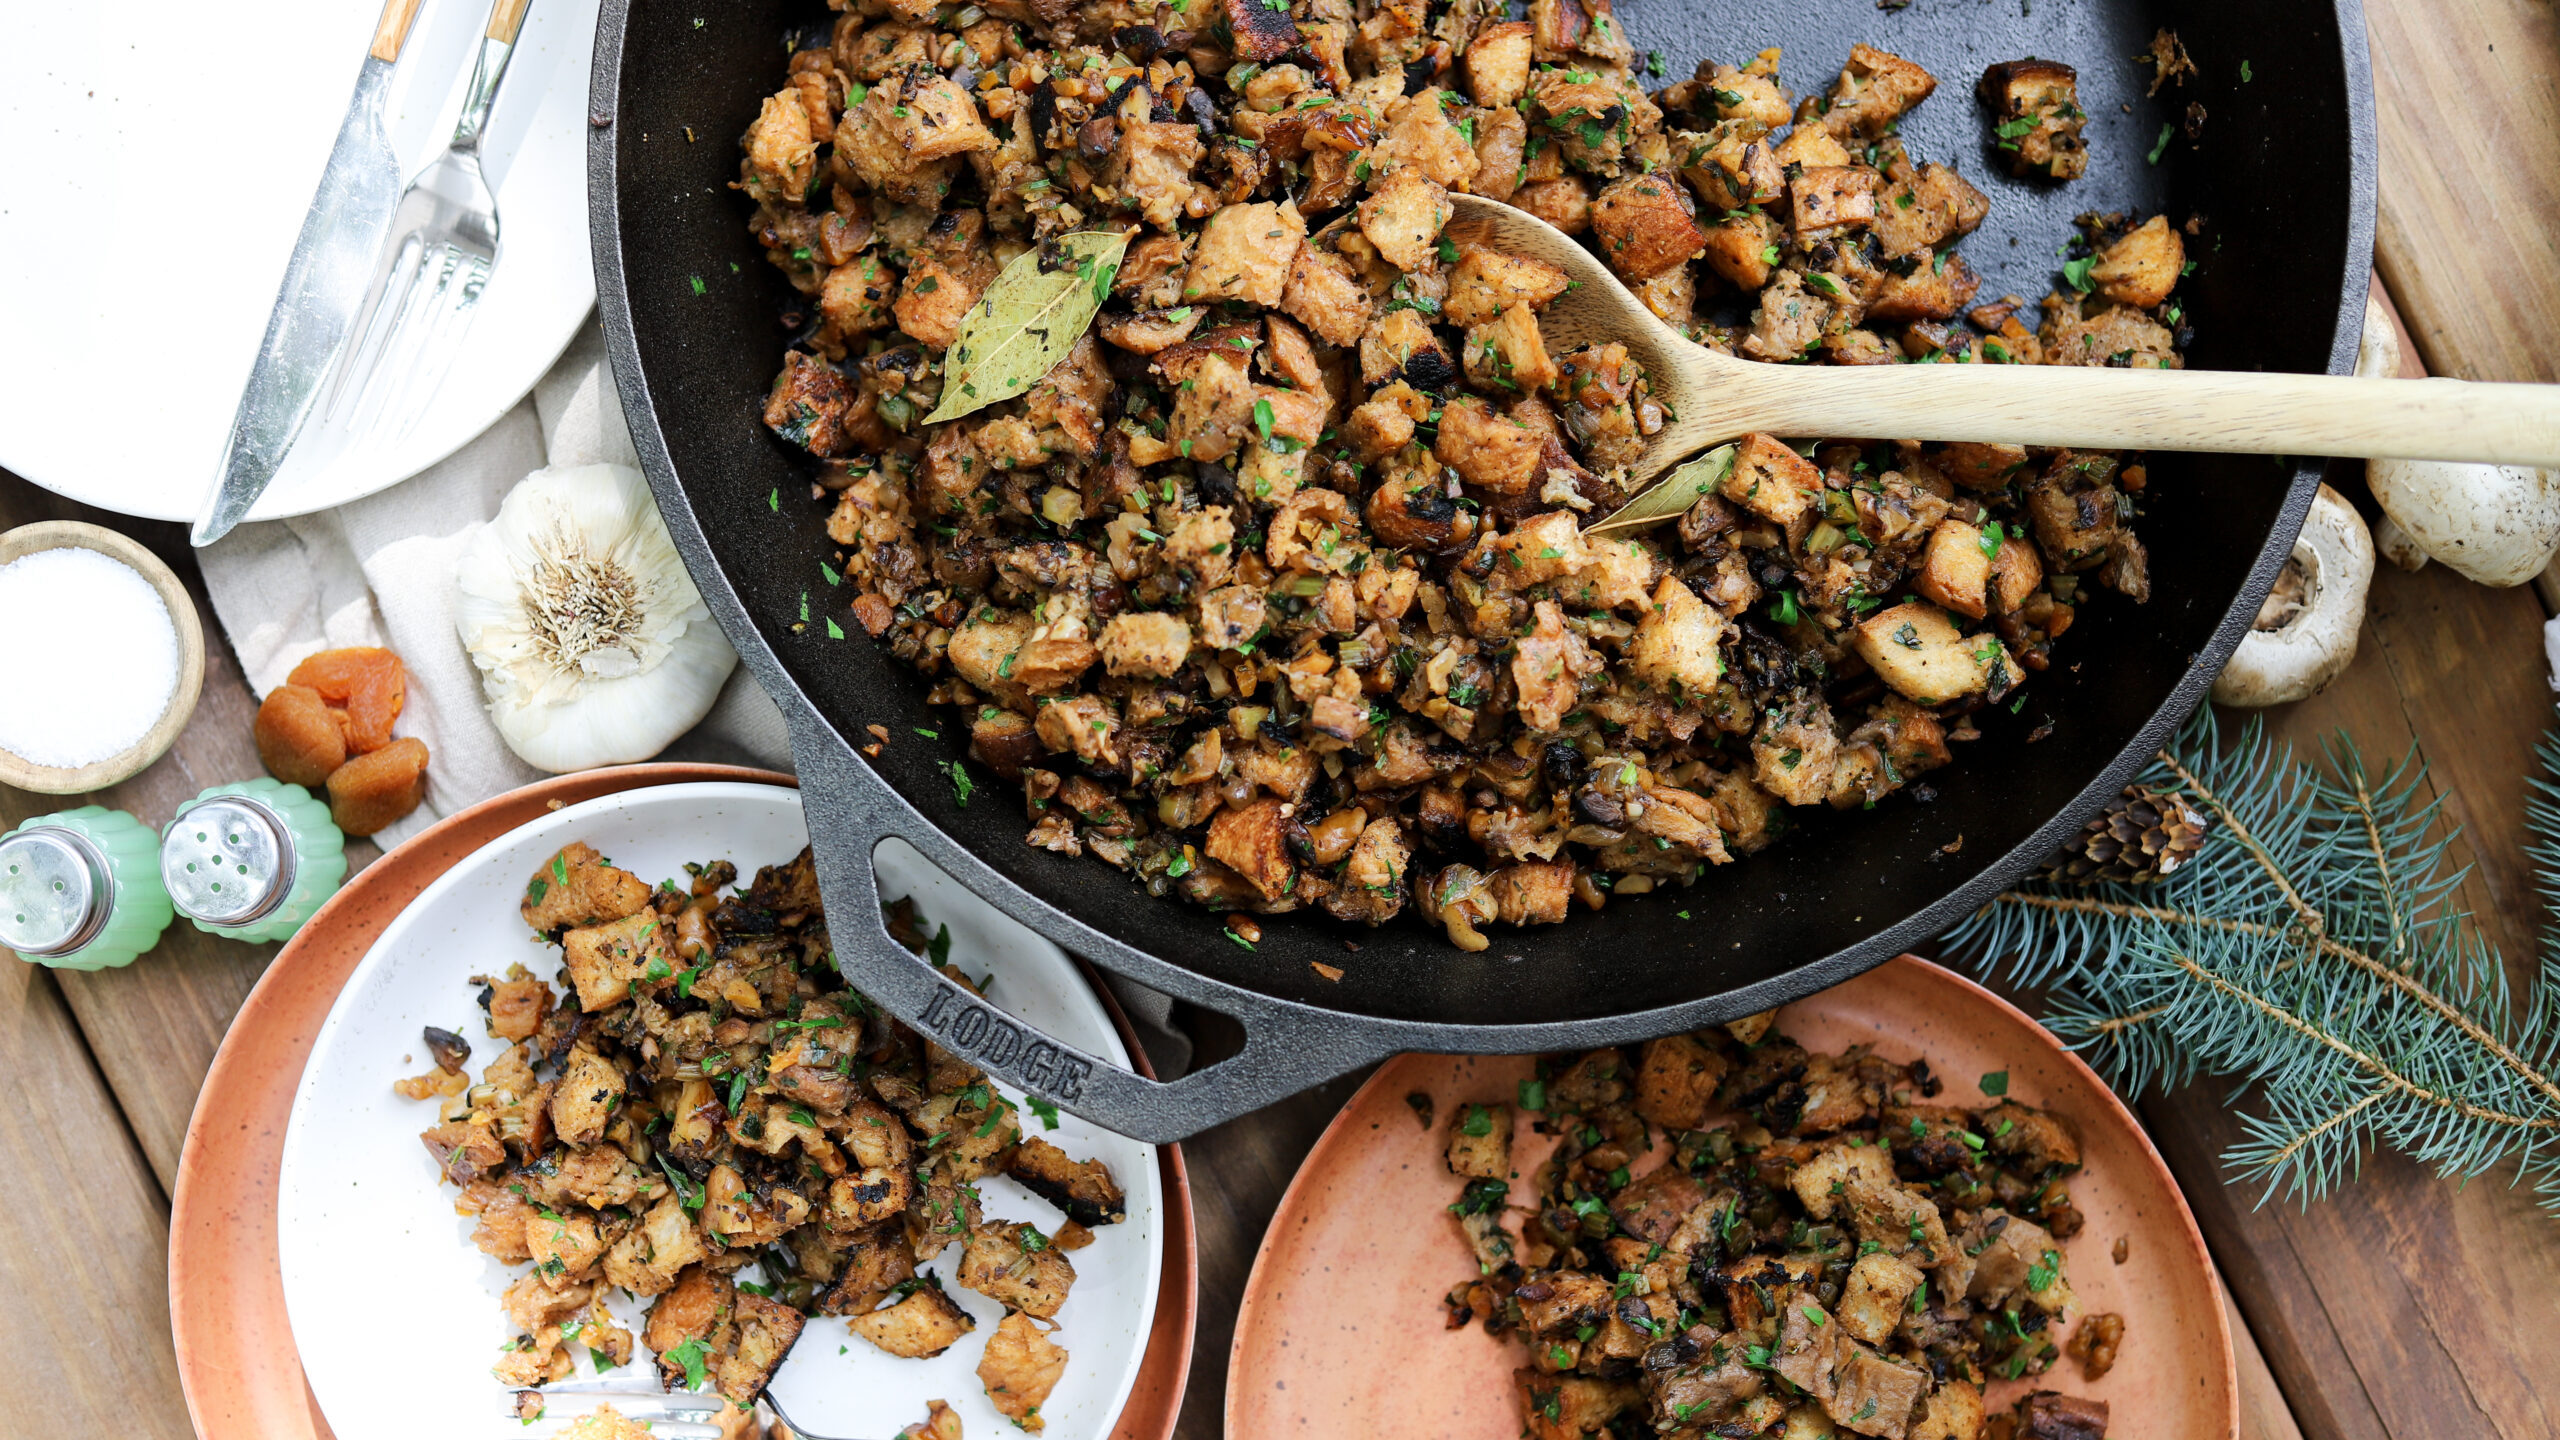 Image for Skillet Stuffing with Mushrooms, Apricots & Walnuts